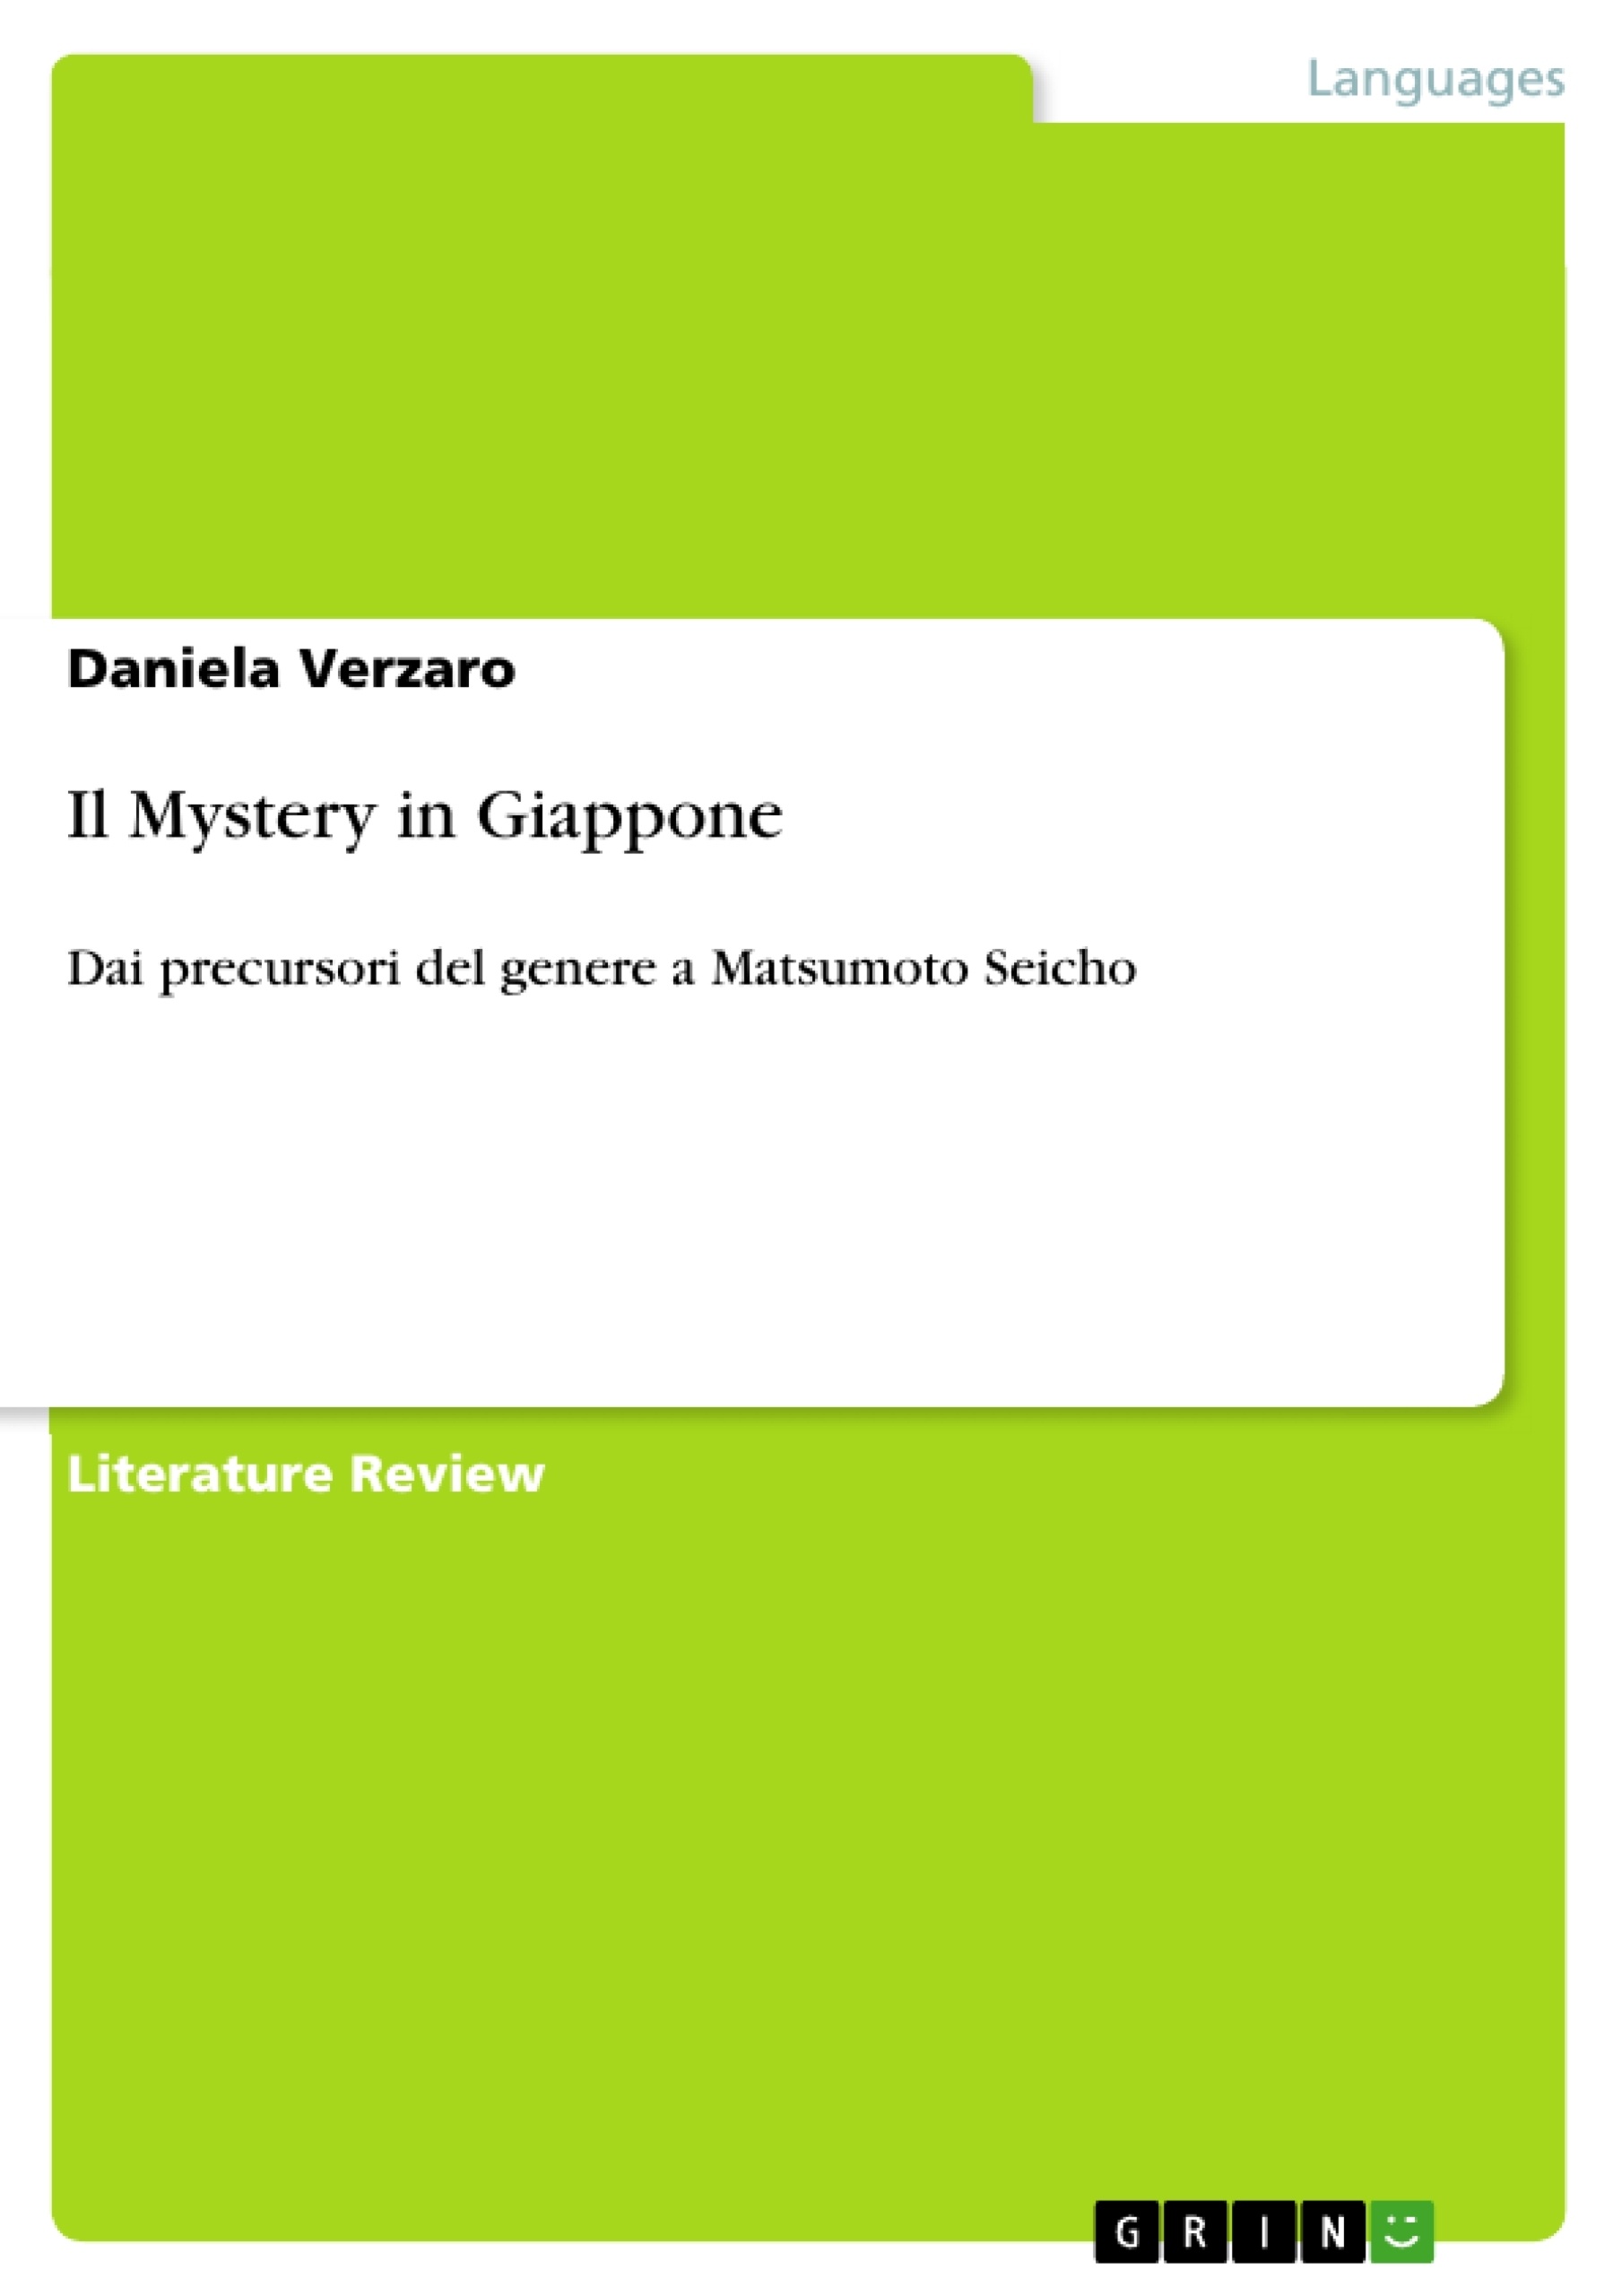 Titre: Il Mystery in Giappone